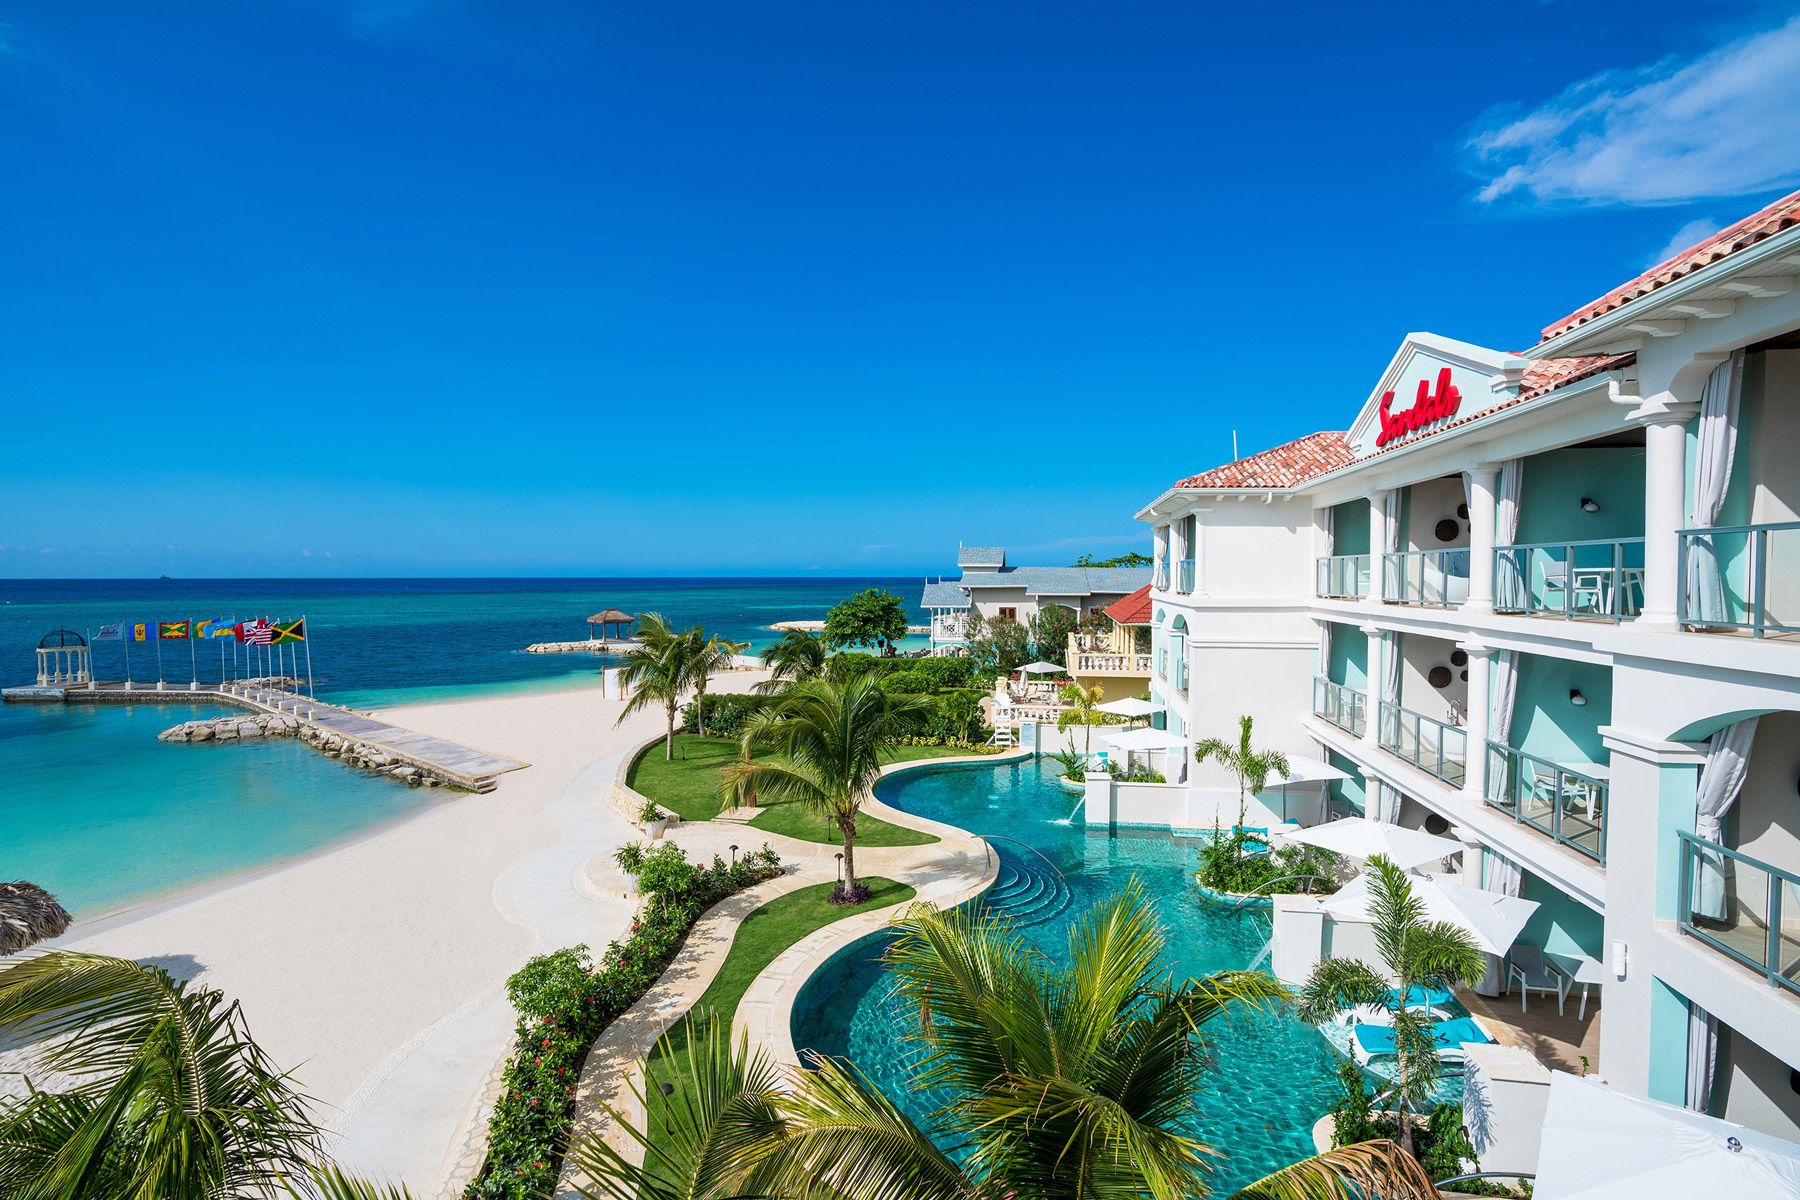 Full Review What Guests Love About Sandals Montego Bay